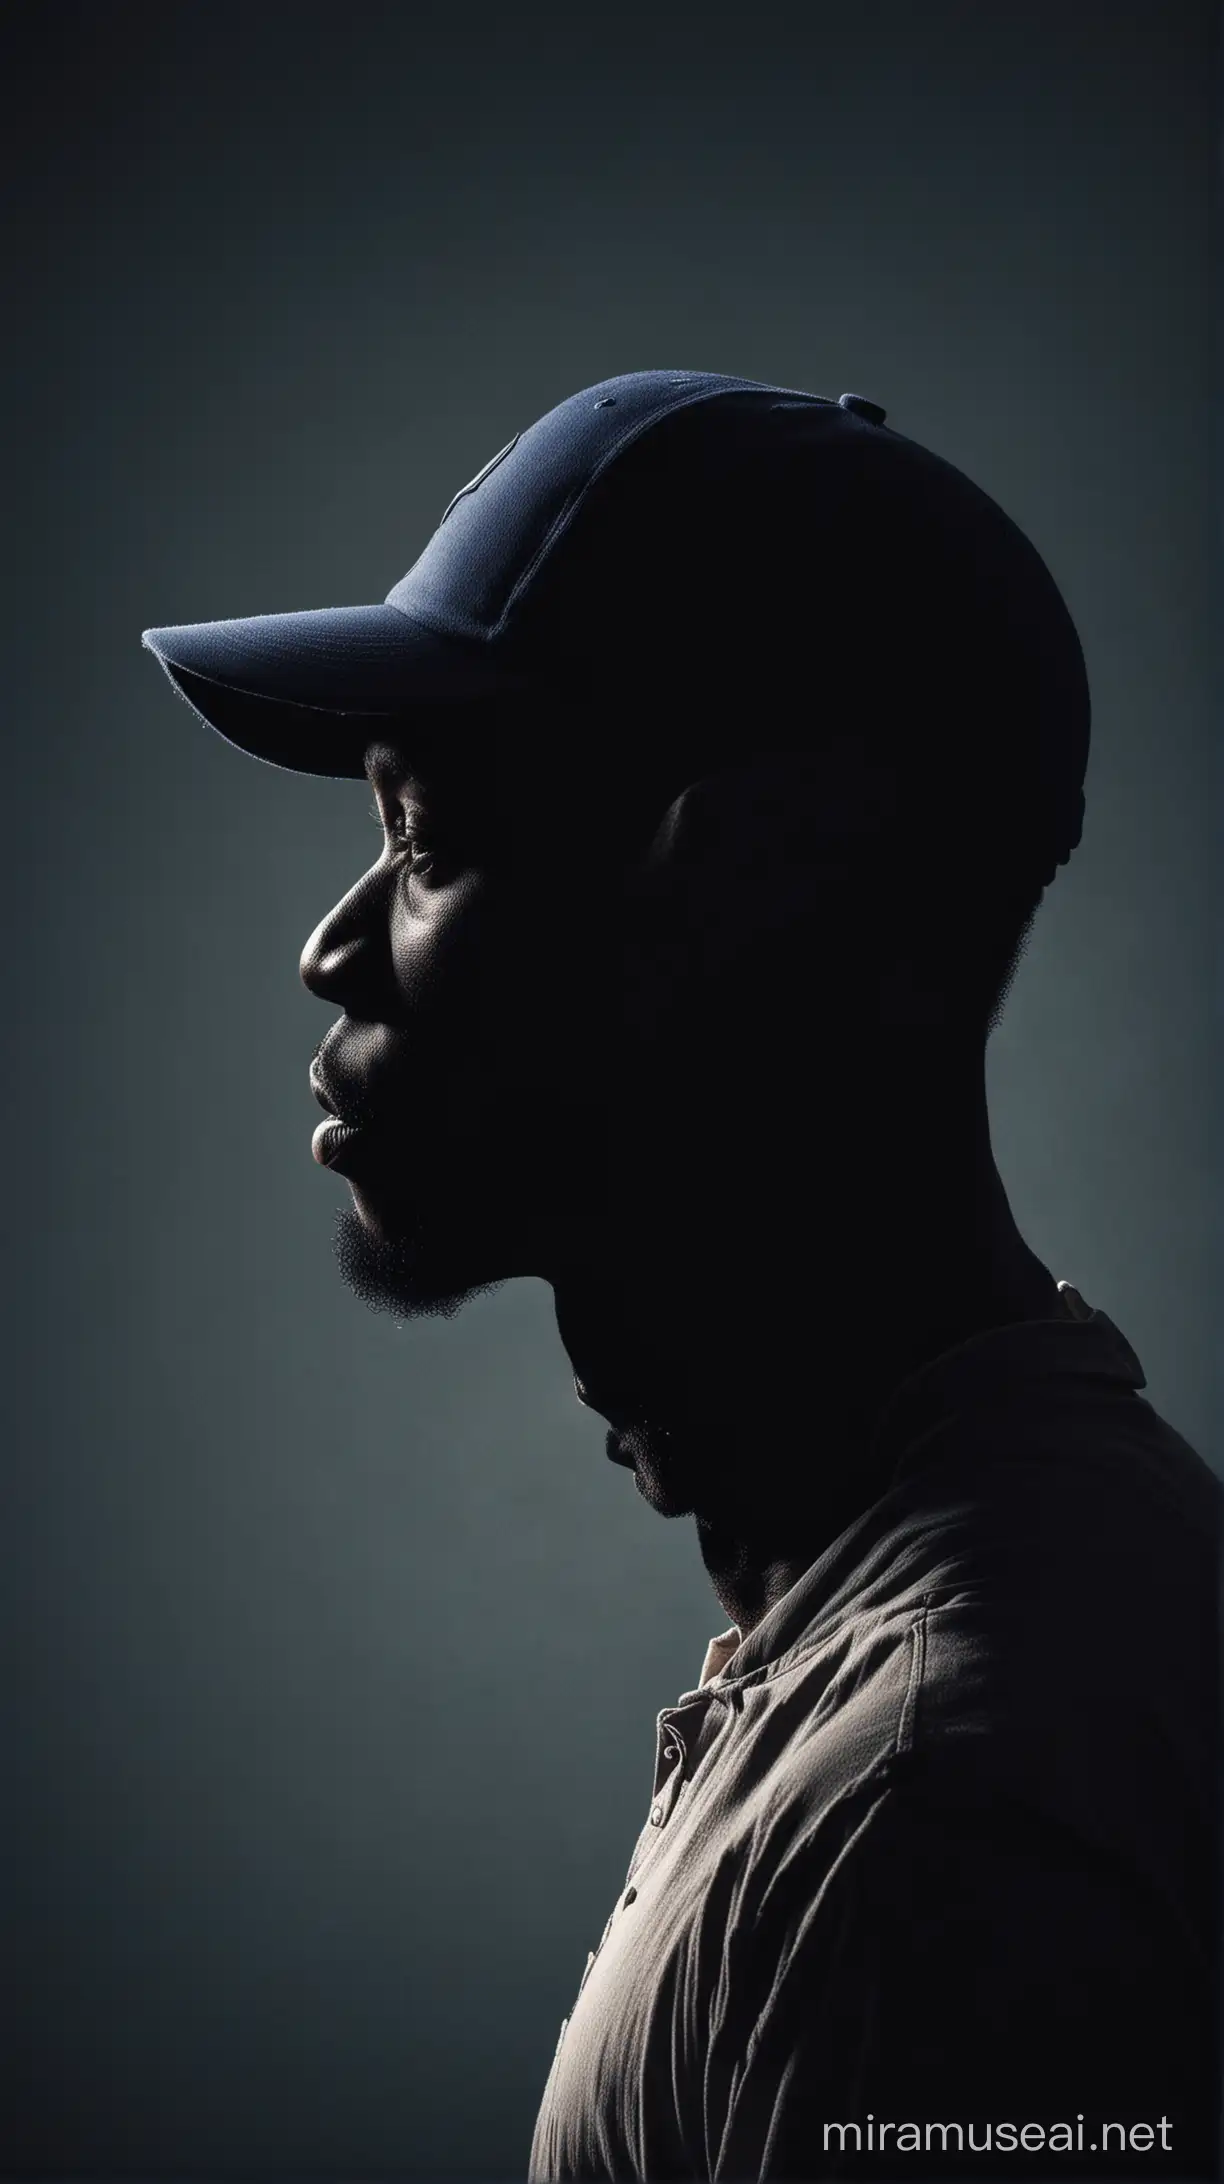 Proud African American Baseball Player Silhouette with Old Fashioned Cap